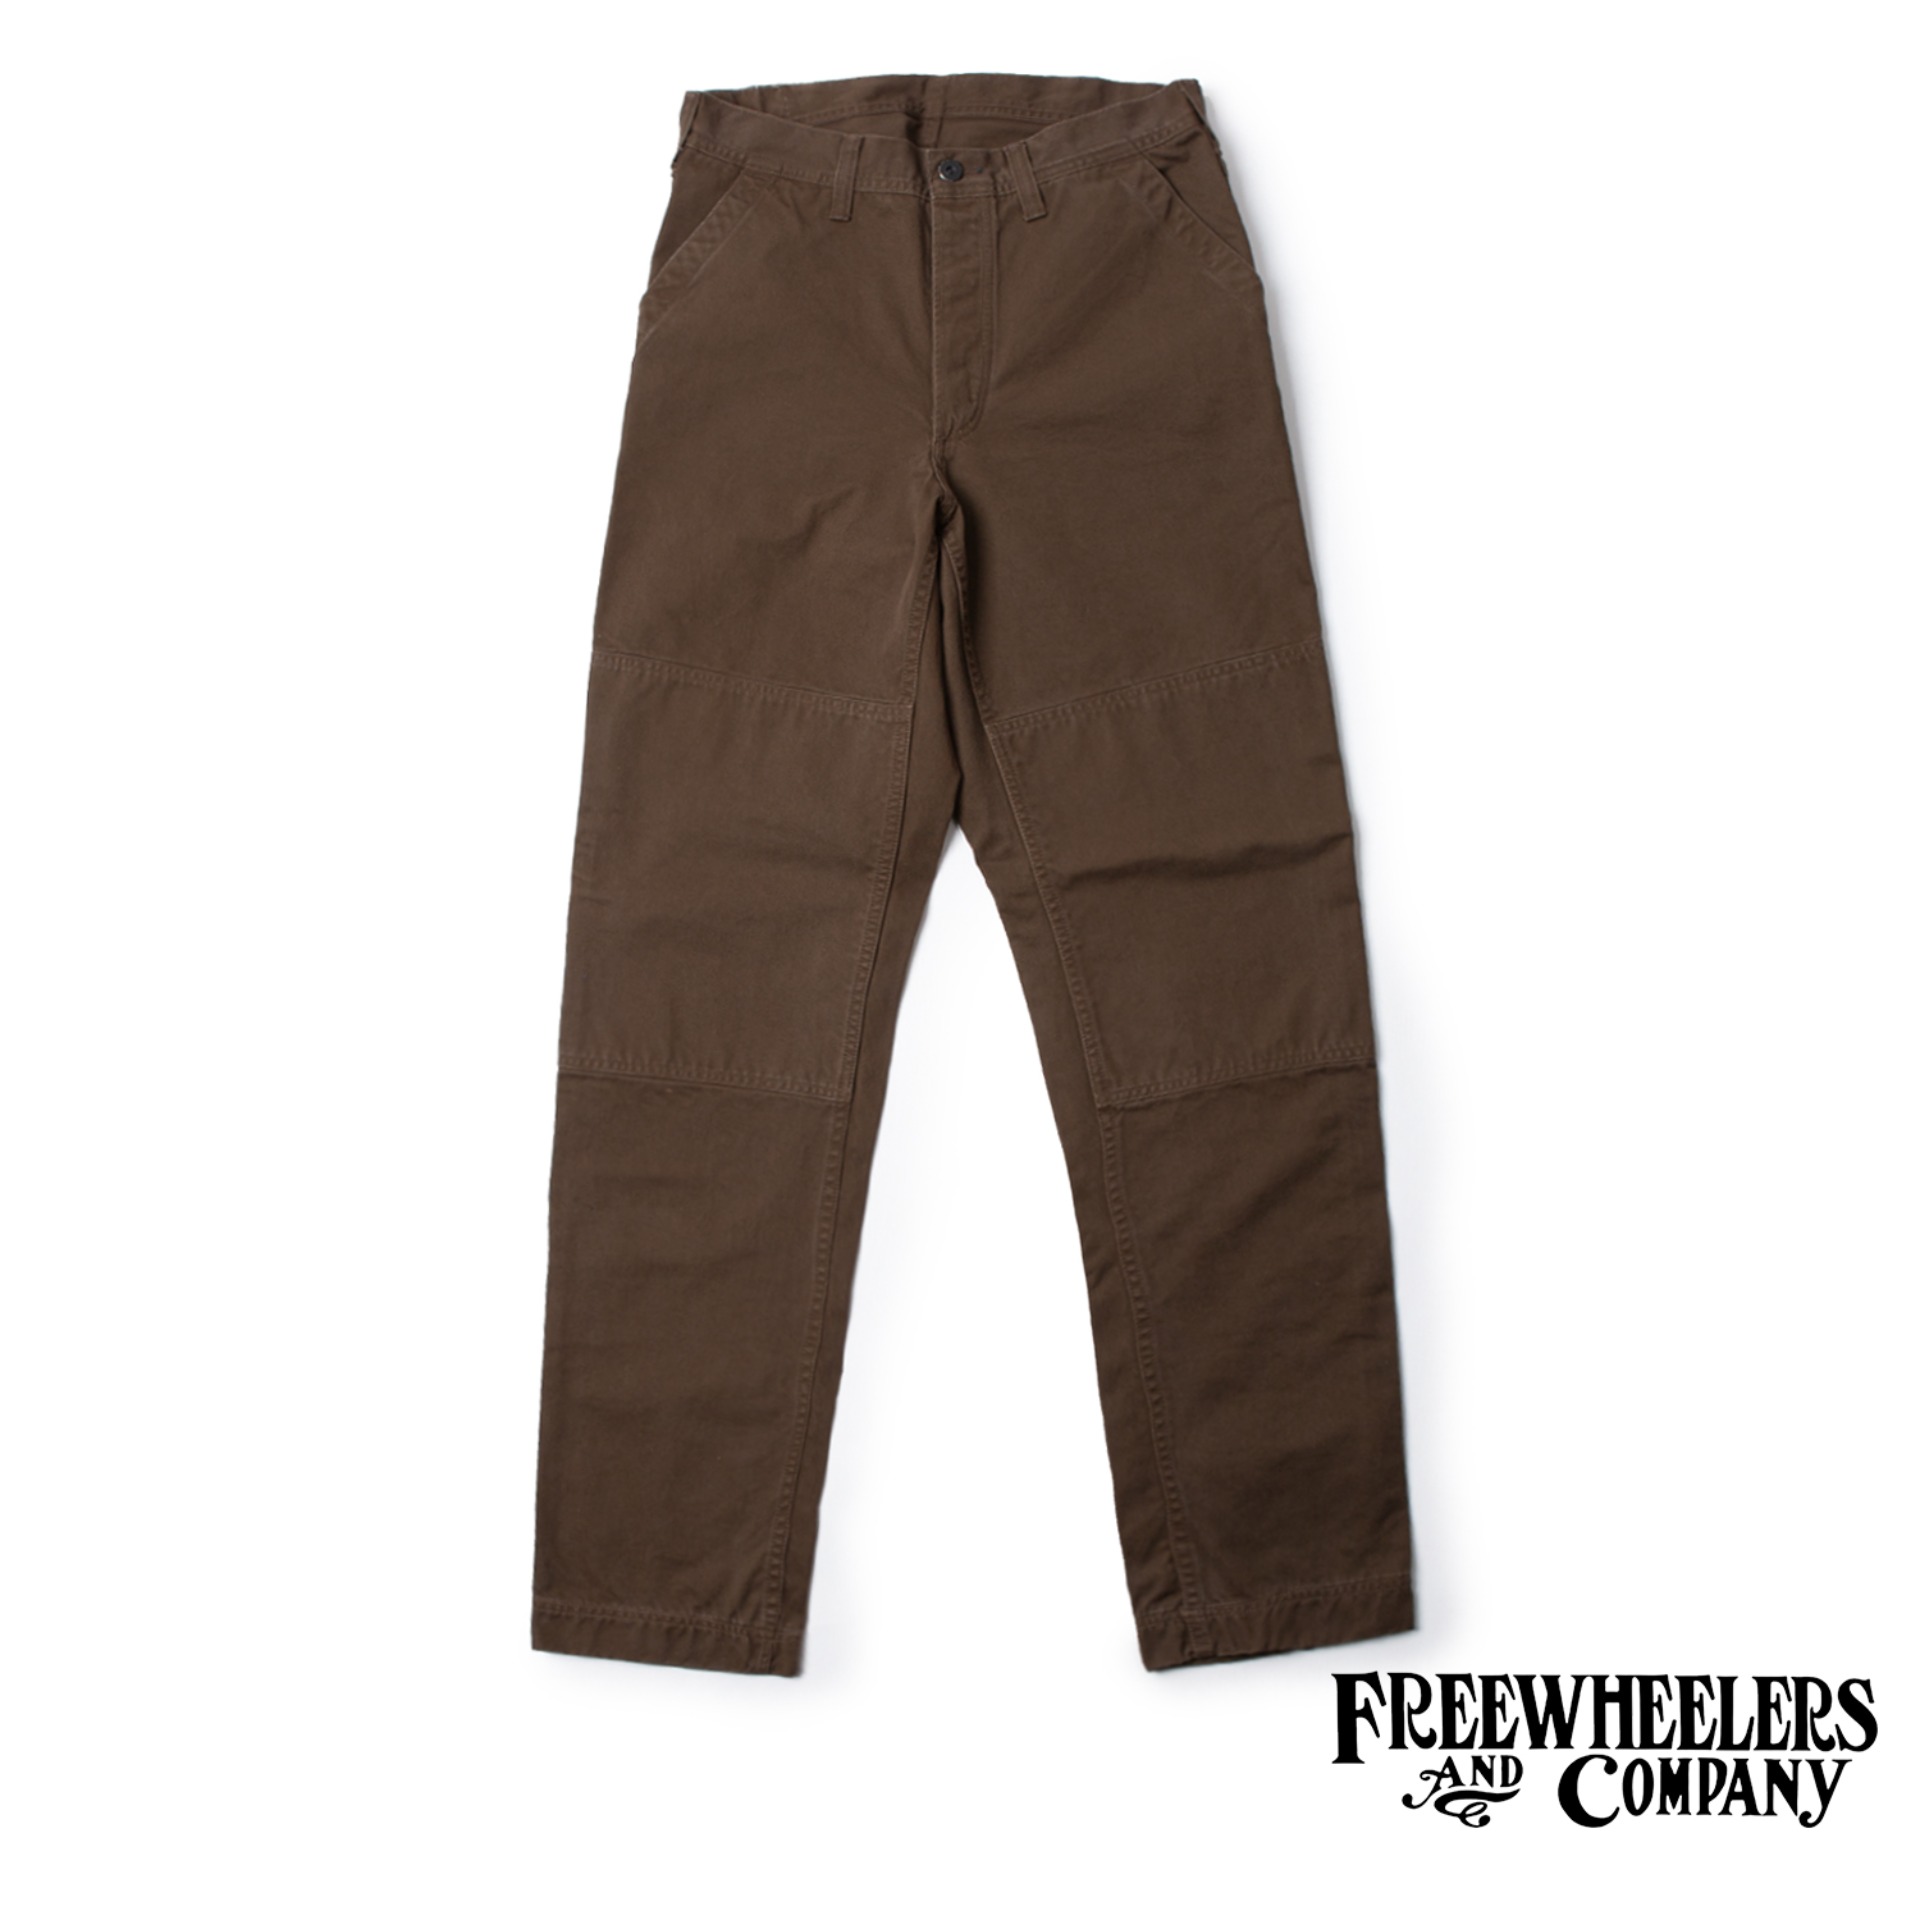 UNION SPECIAL OVERALLS]WORK PANTS